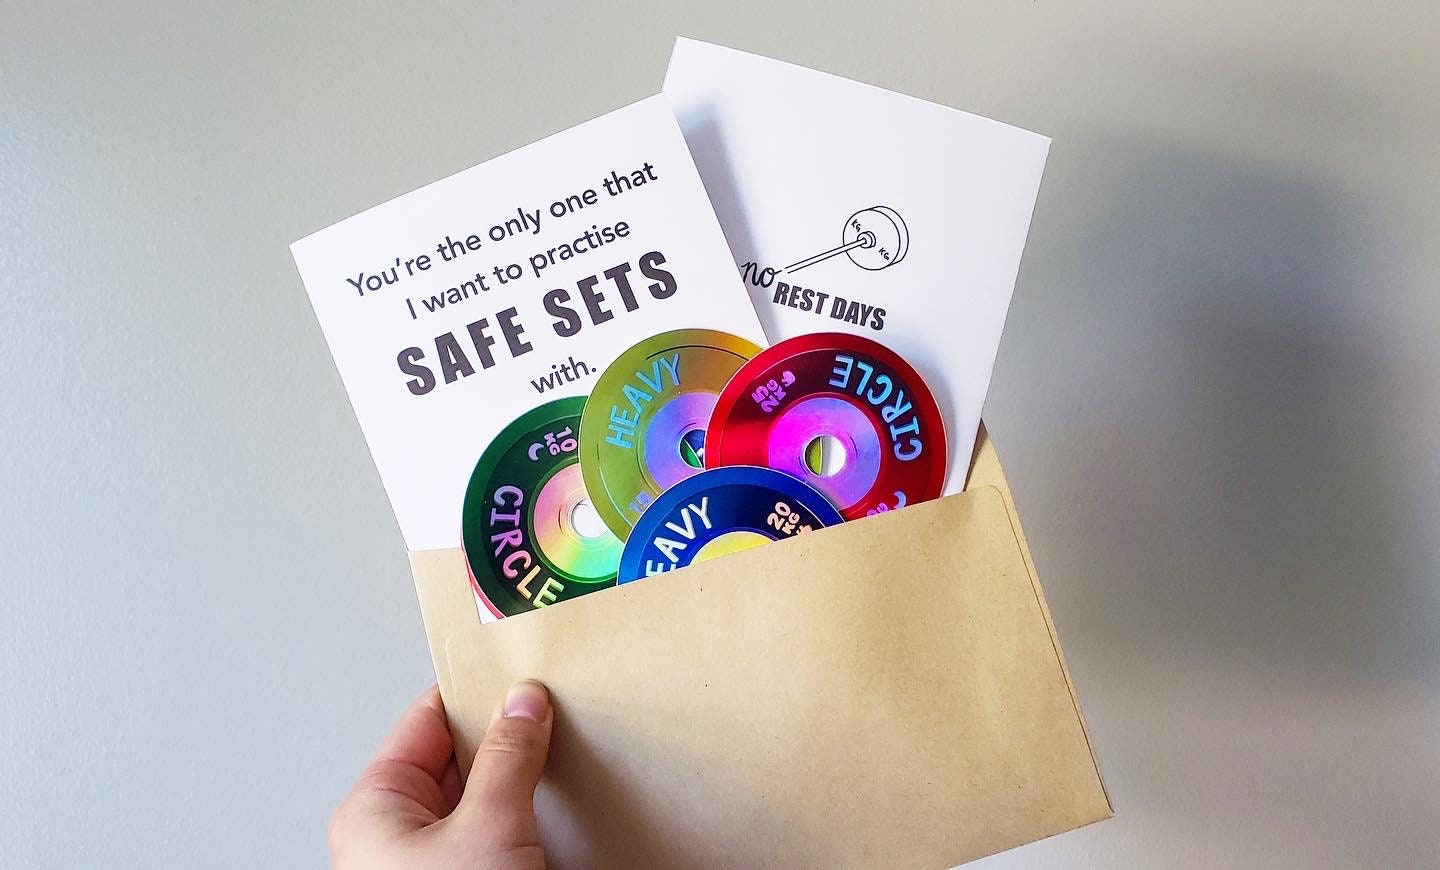 Safe Sets Card + Holographic KG Plate Stickers